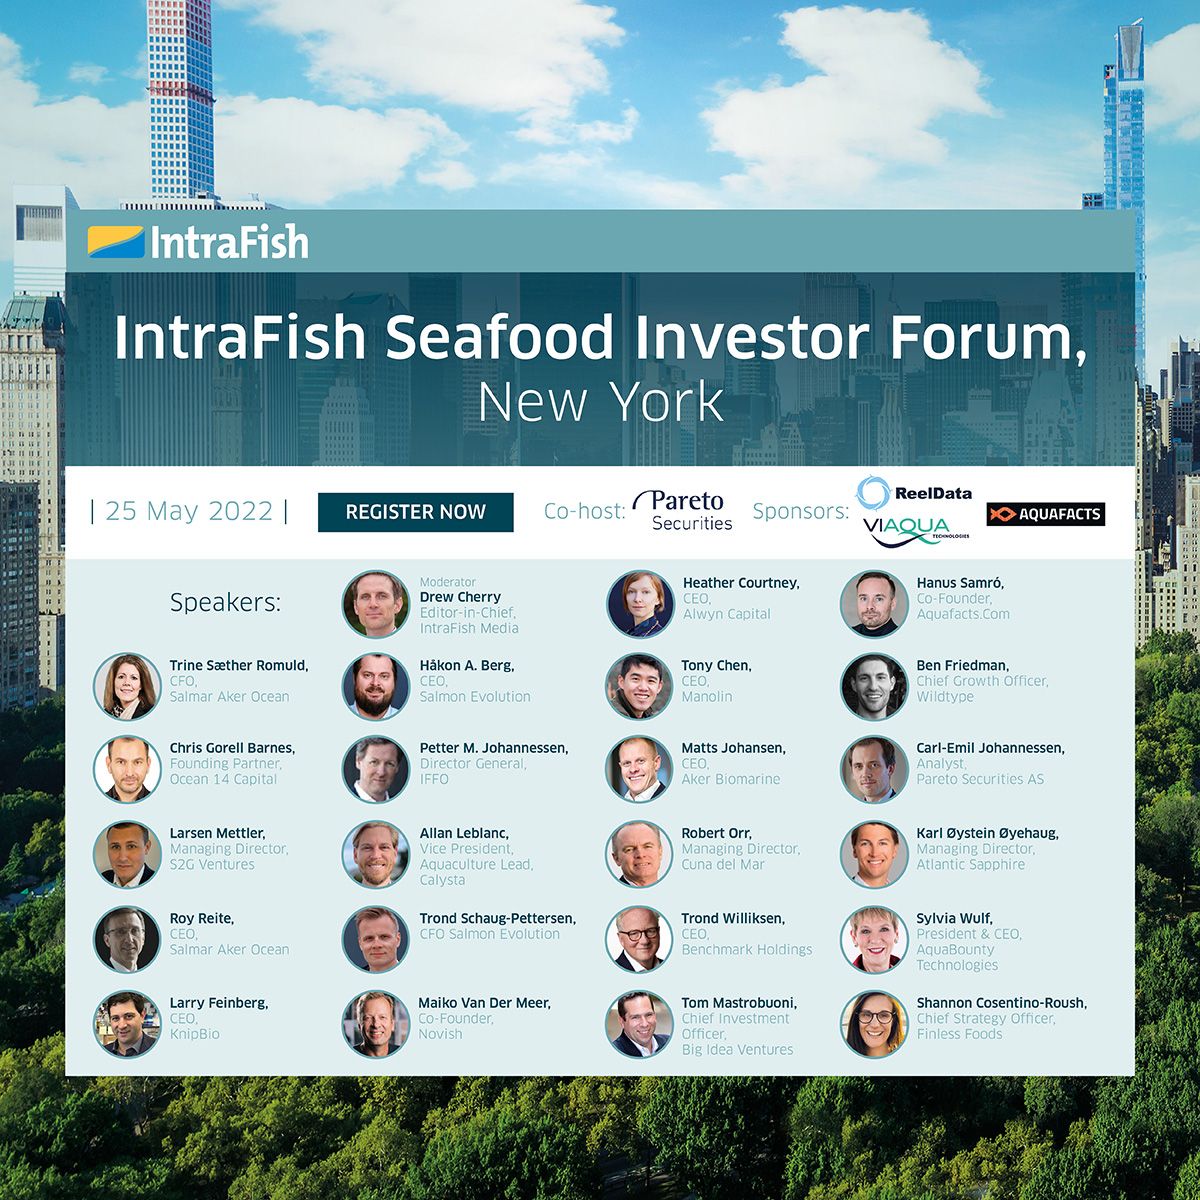 HAVE YOU SECURED YOUR PLACE?

This is your key destination to surrounded yourself with leaders in the seafood community in the heart of New York. Don't miss out on the chance to be part of it - make sure you're in the room.

👉 Register Now: https://t.co/6RBKKQTDnx https://t.co/DlDIpAgYOS